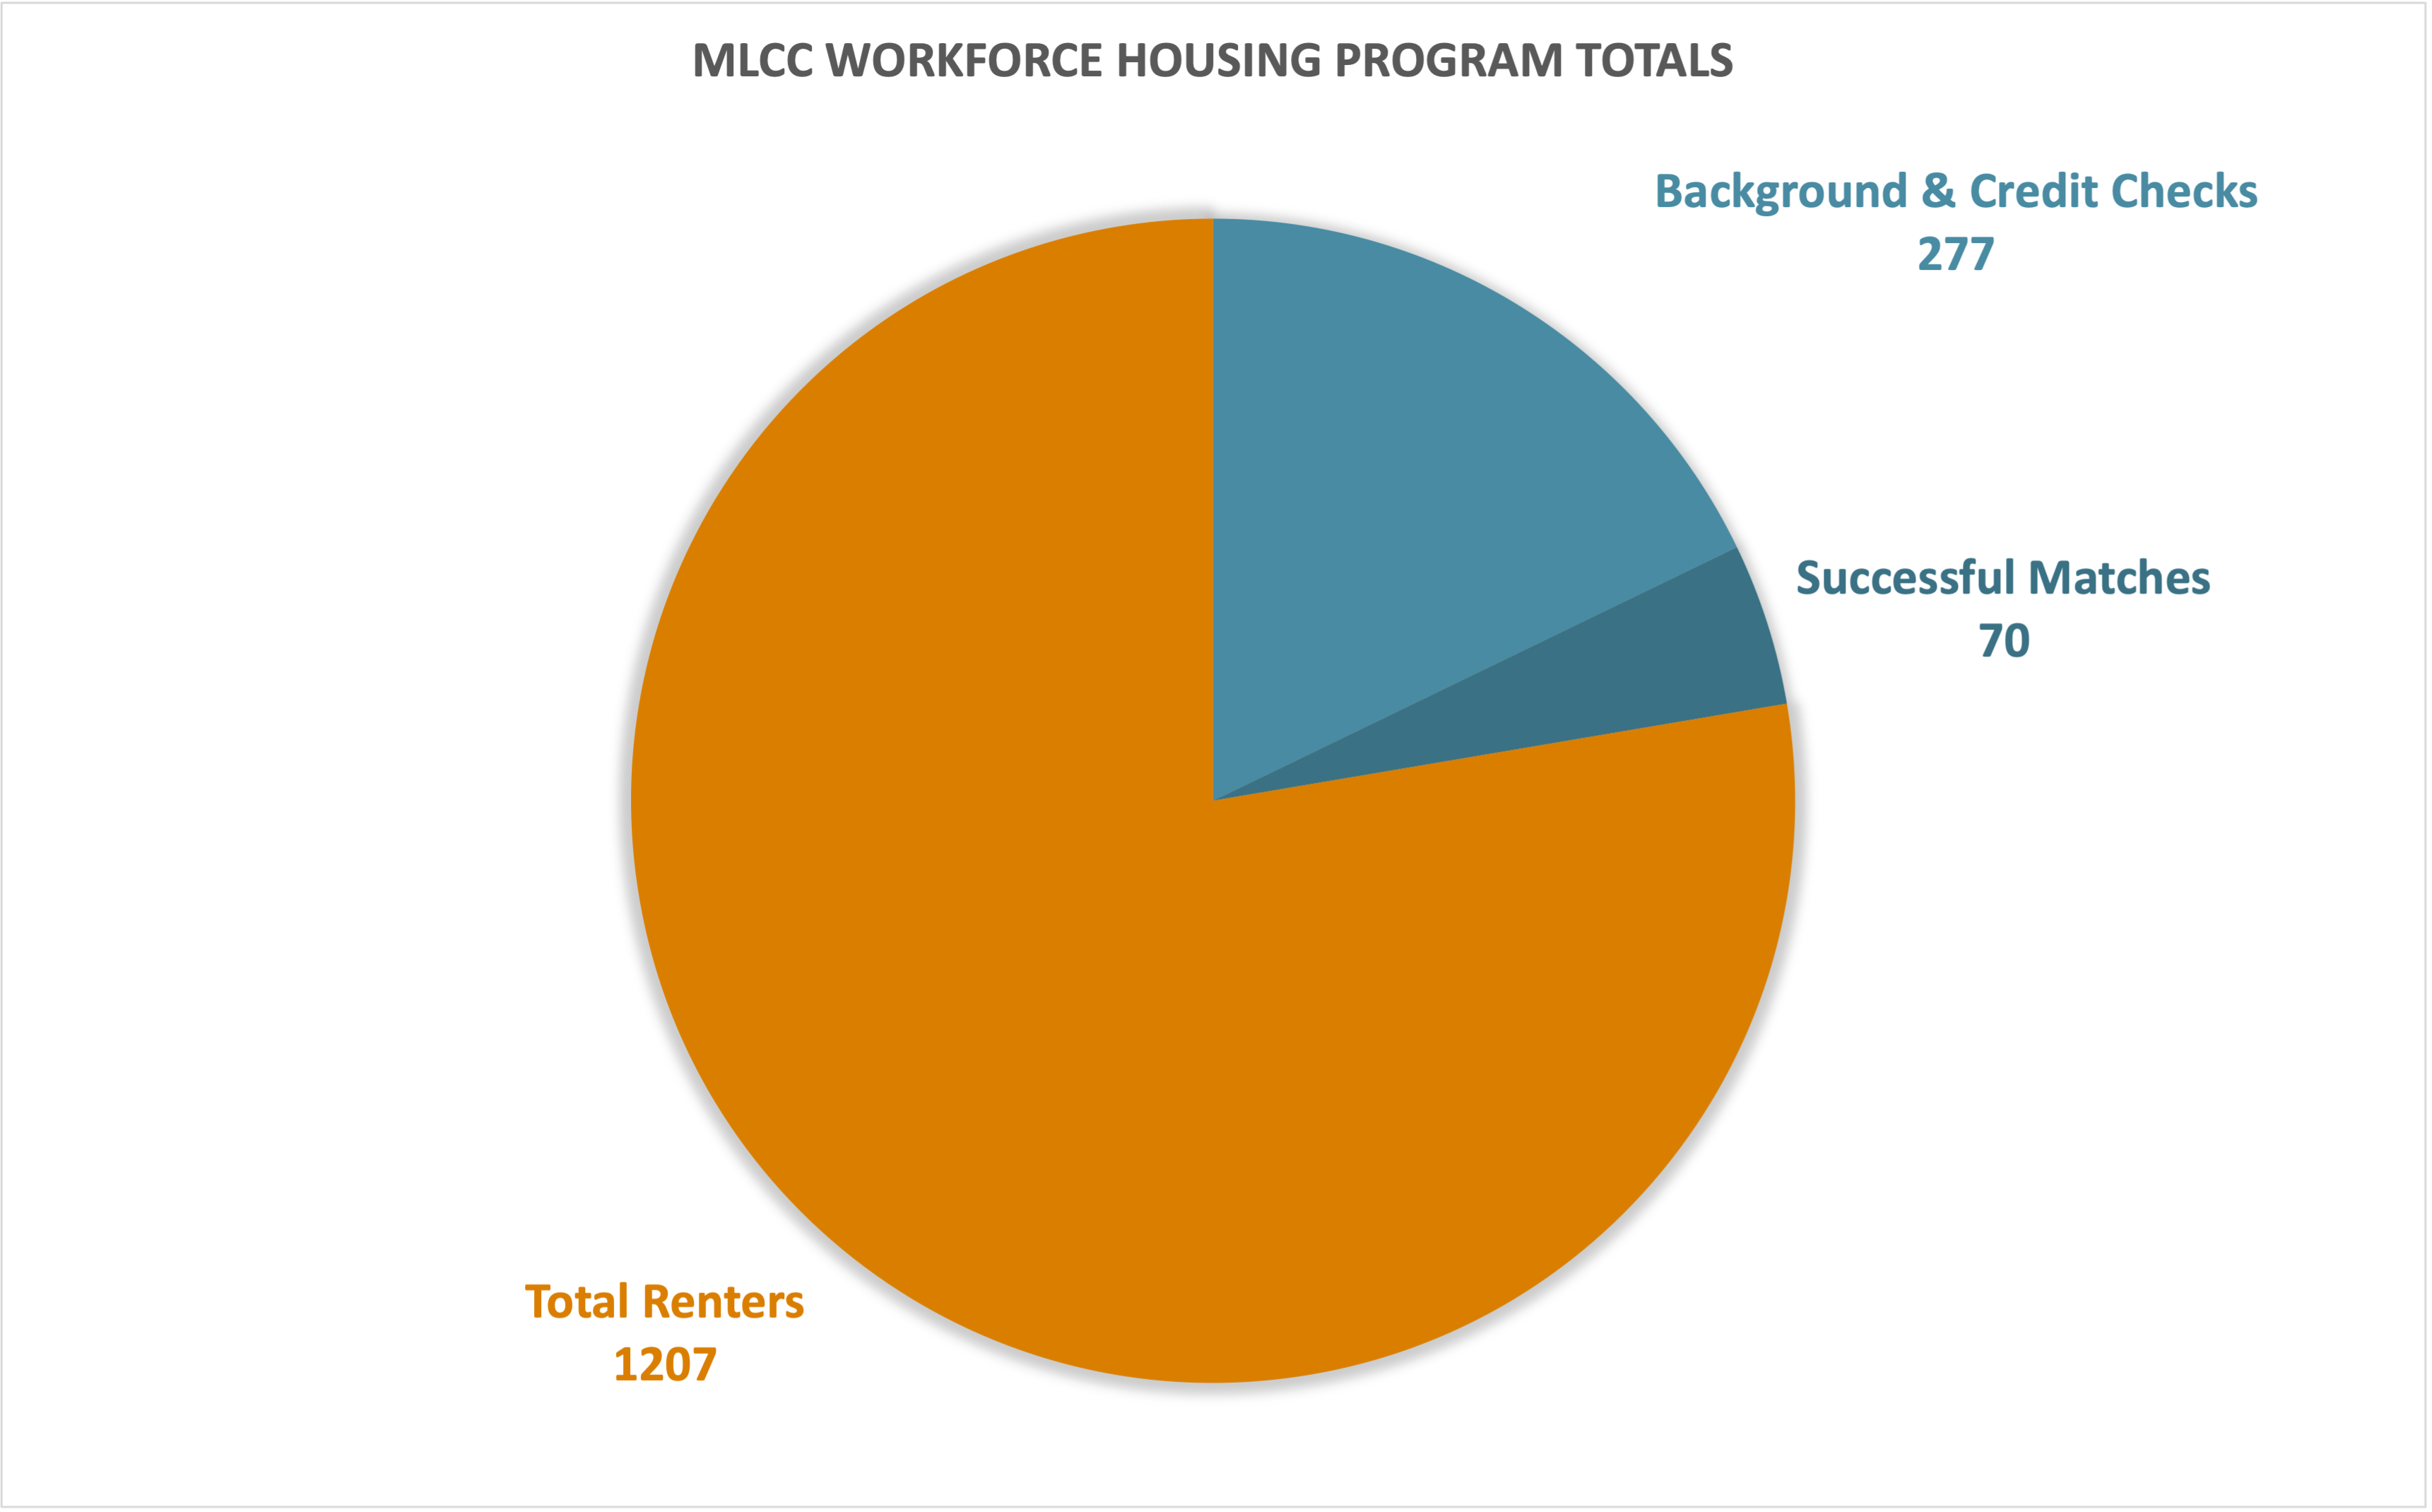 A graphic showing MLCC Workforce Housing Program totals: 1207 total renters, 70 successful matches, and 277 background and credit checks